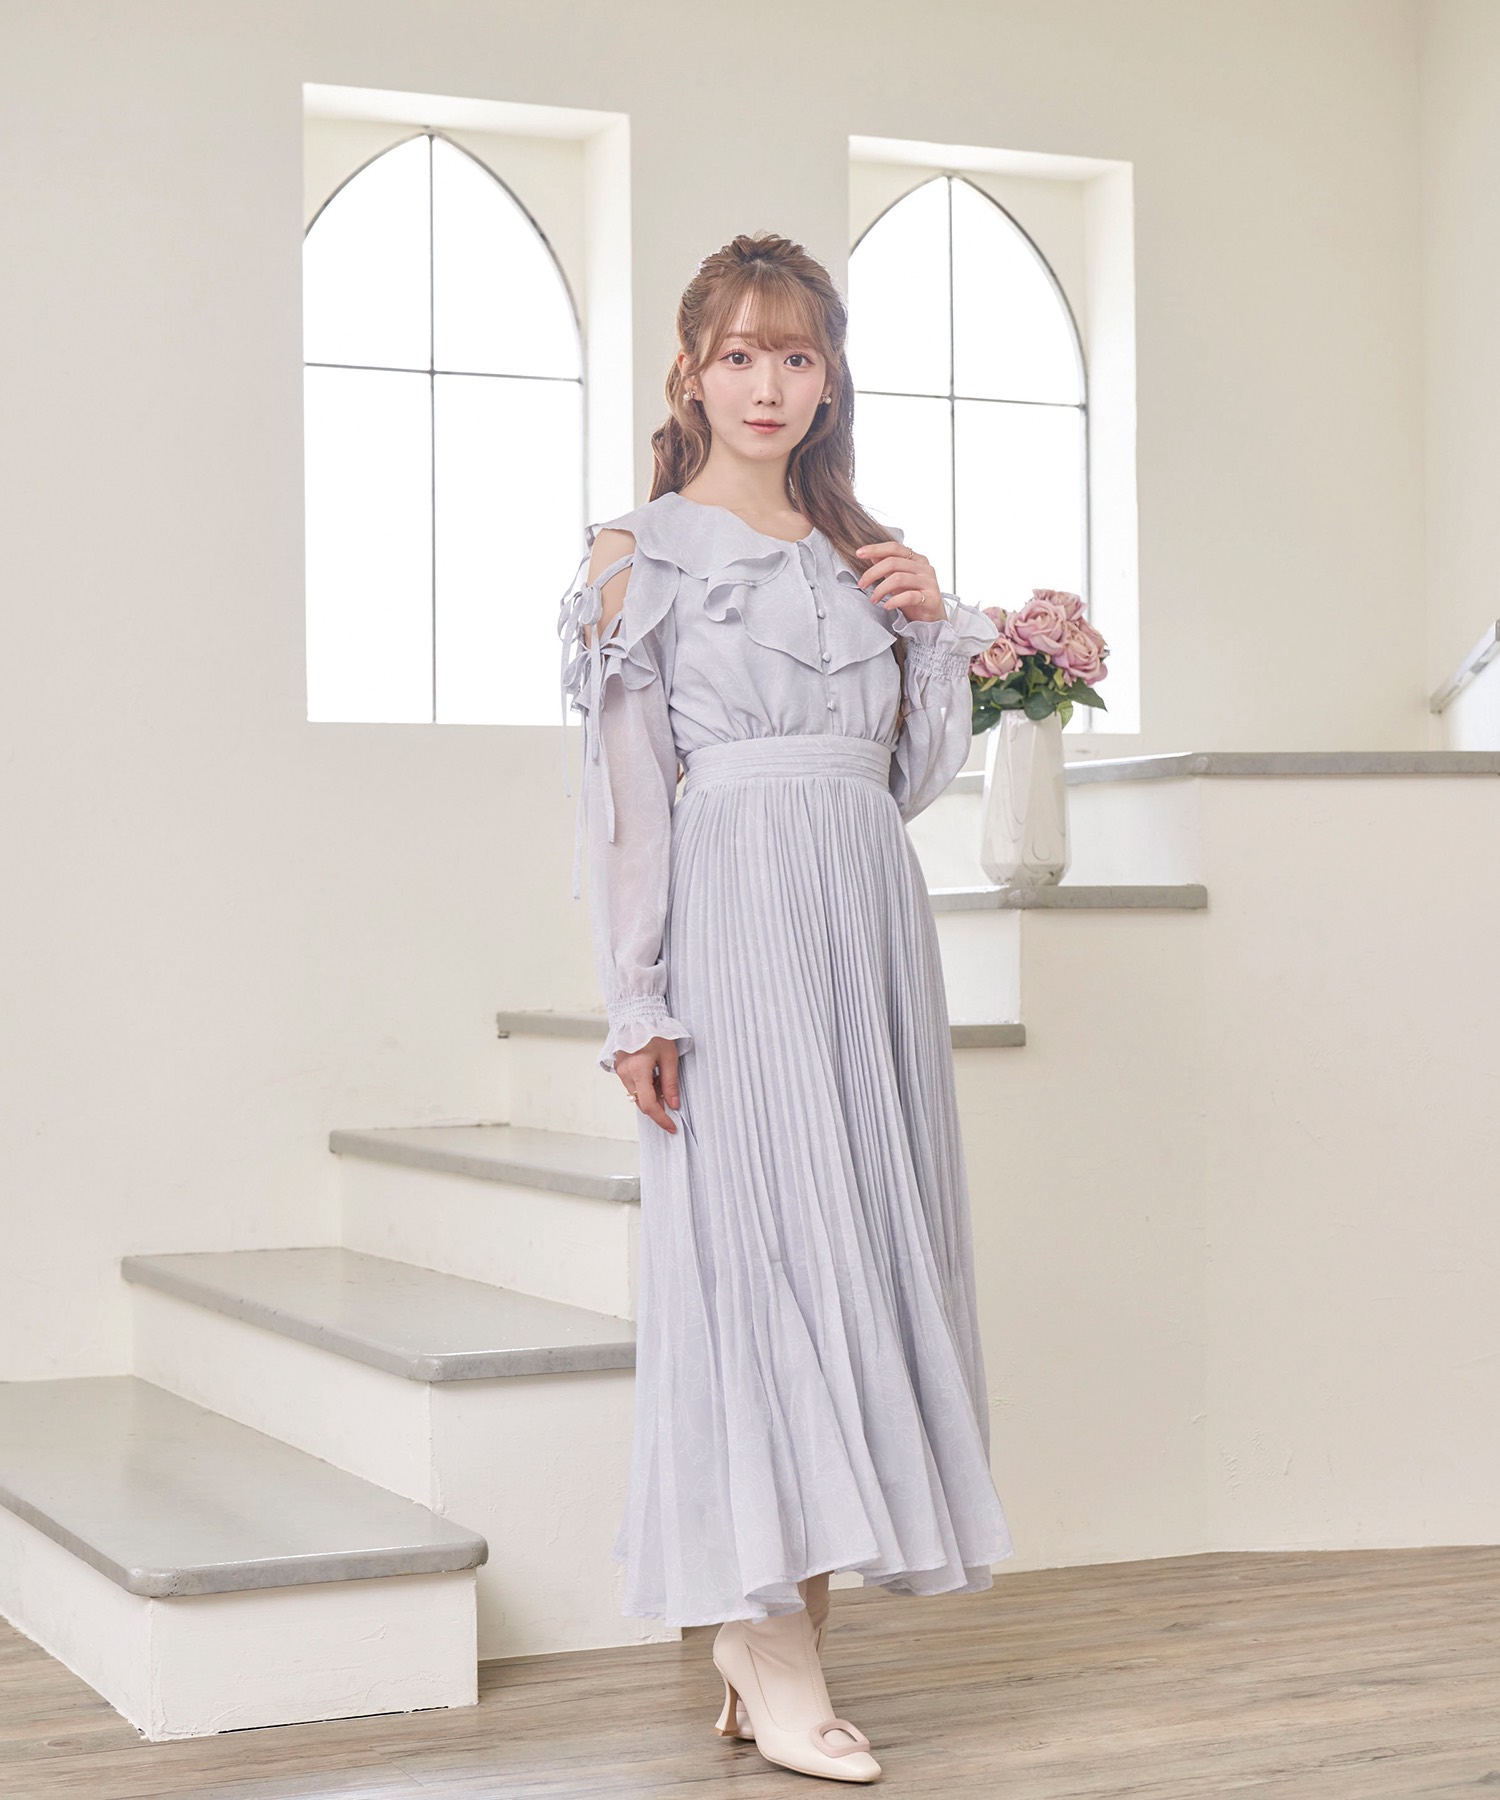 floral line pleated dress【sax】 – BUNNY APARTMENT